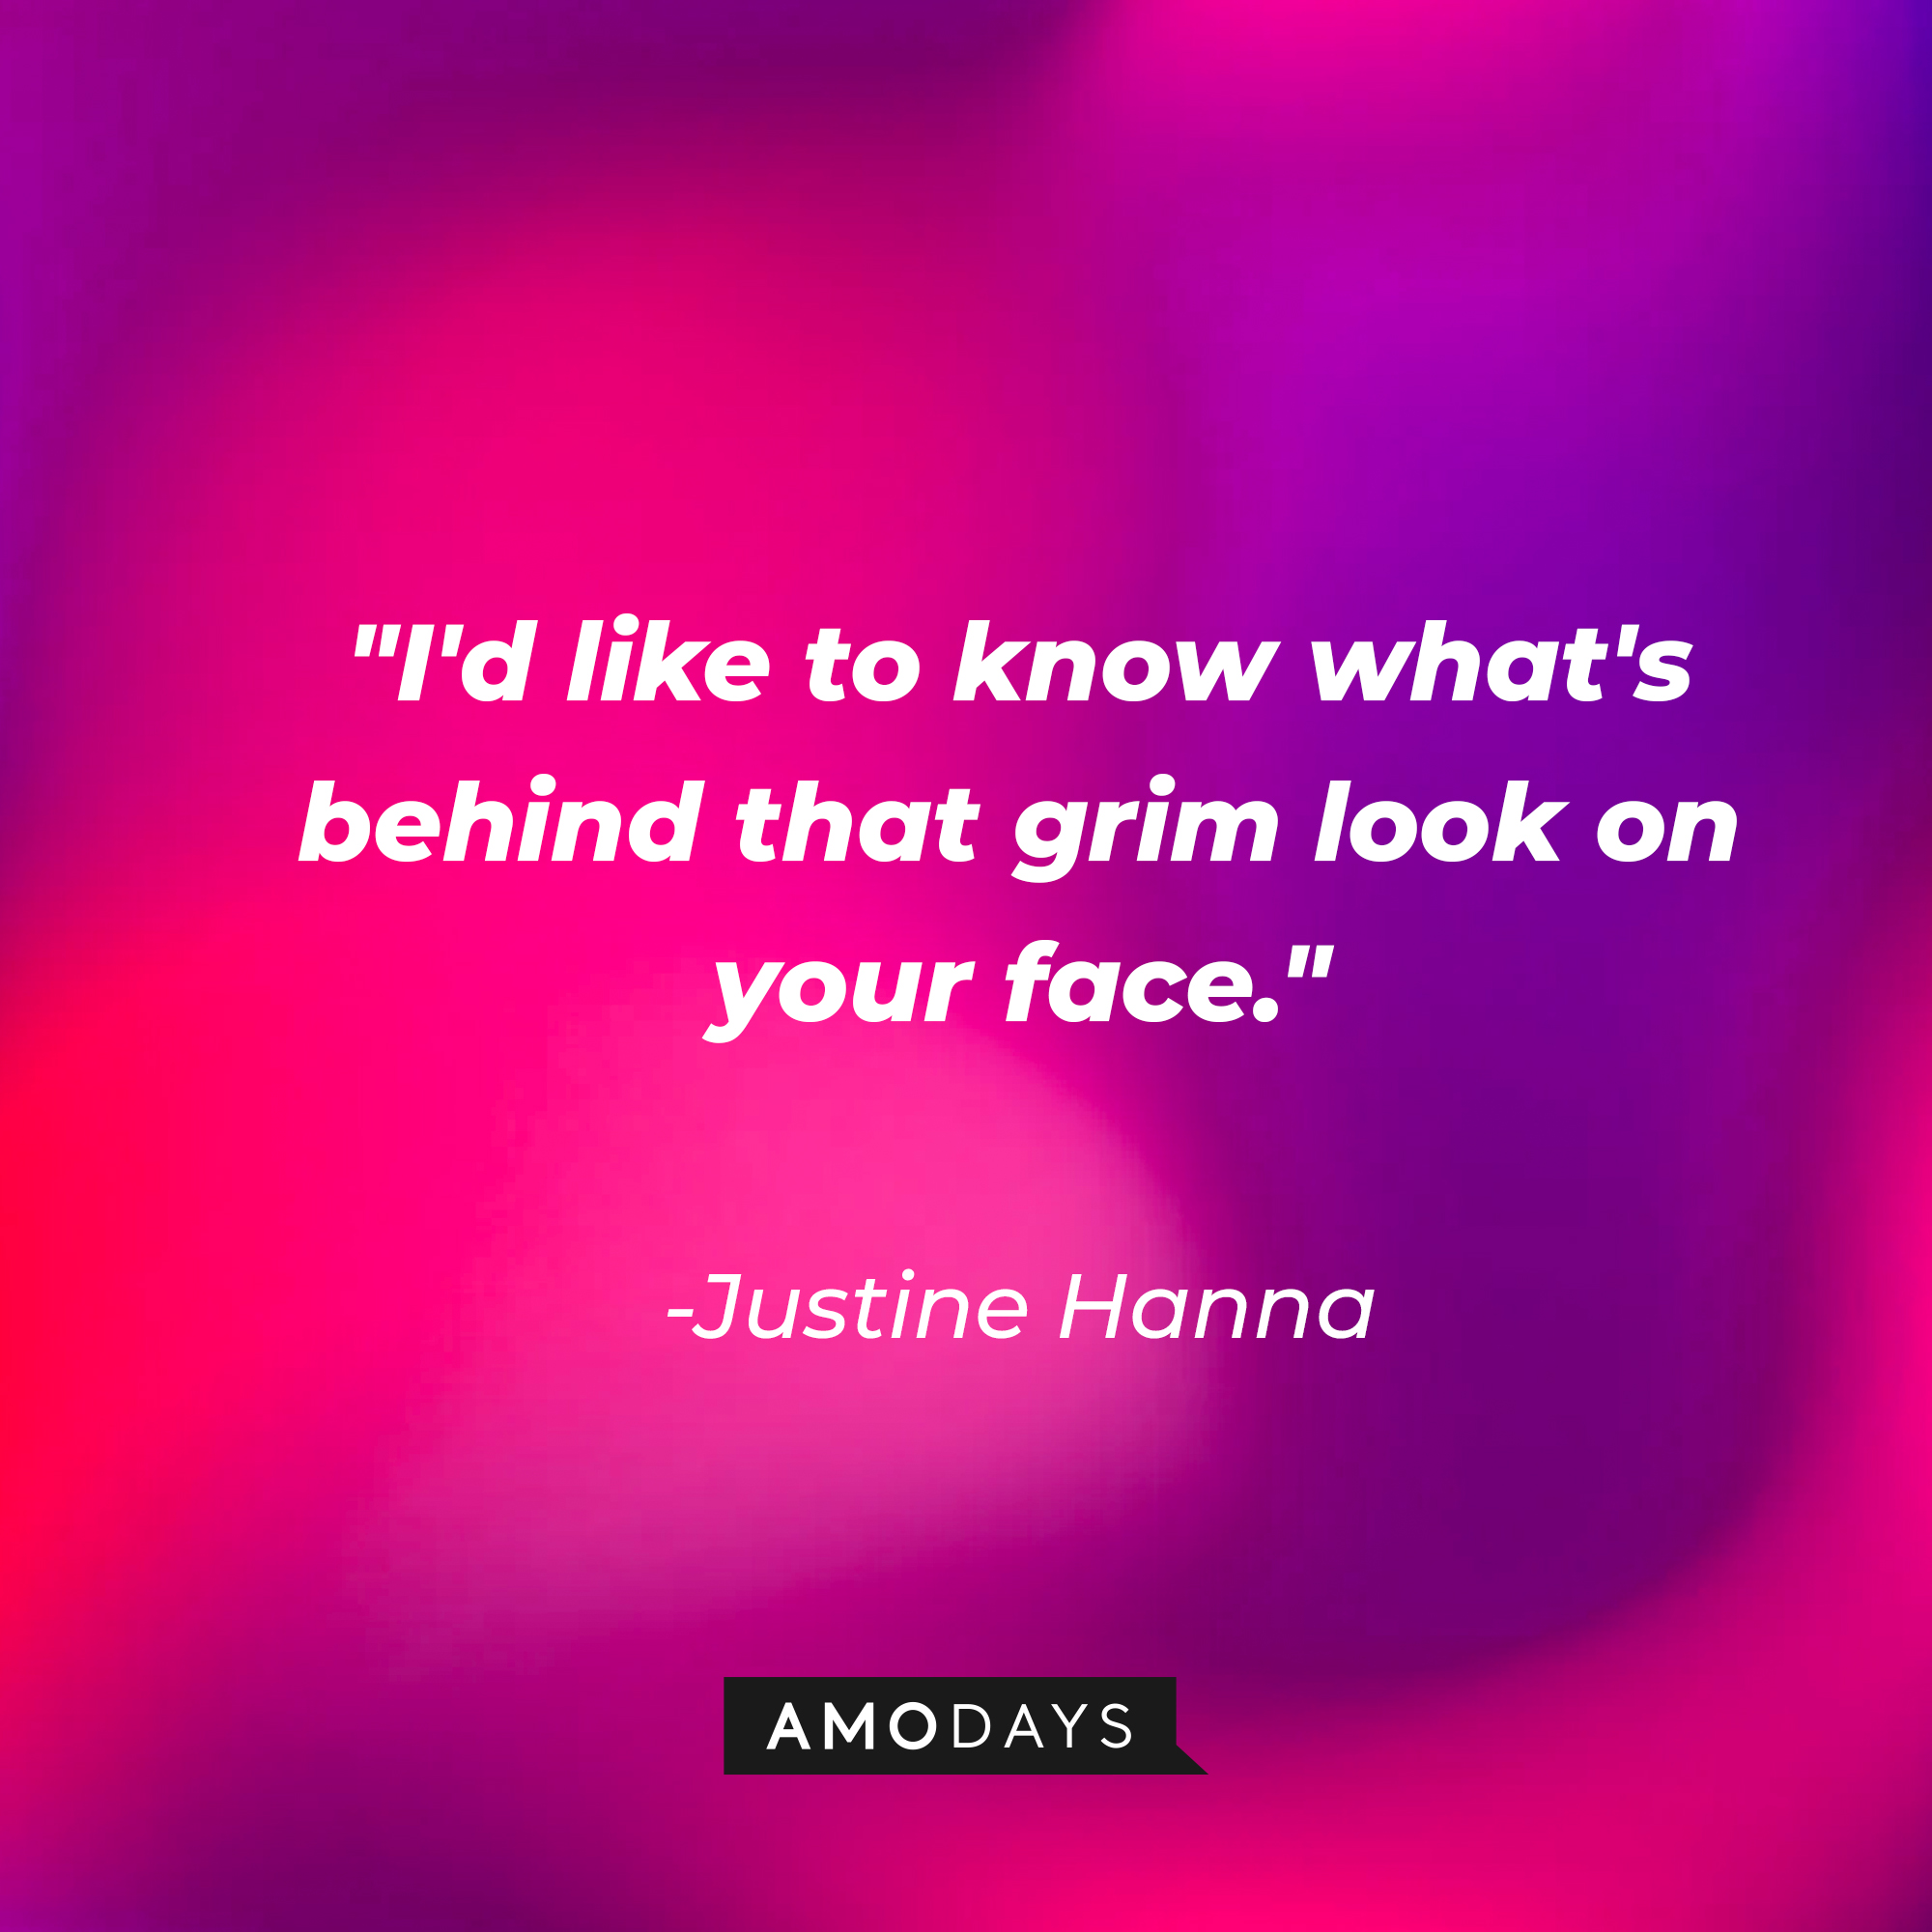 Justine Hanna's quote: "I'd like to know what's behind that grim look on your face." | Source: AmoDays